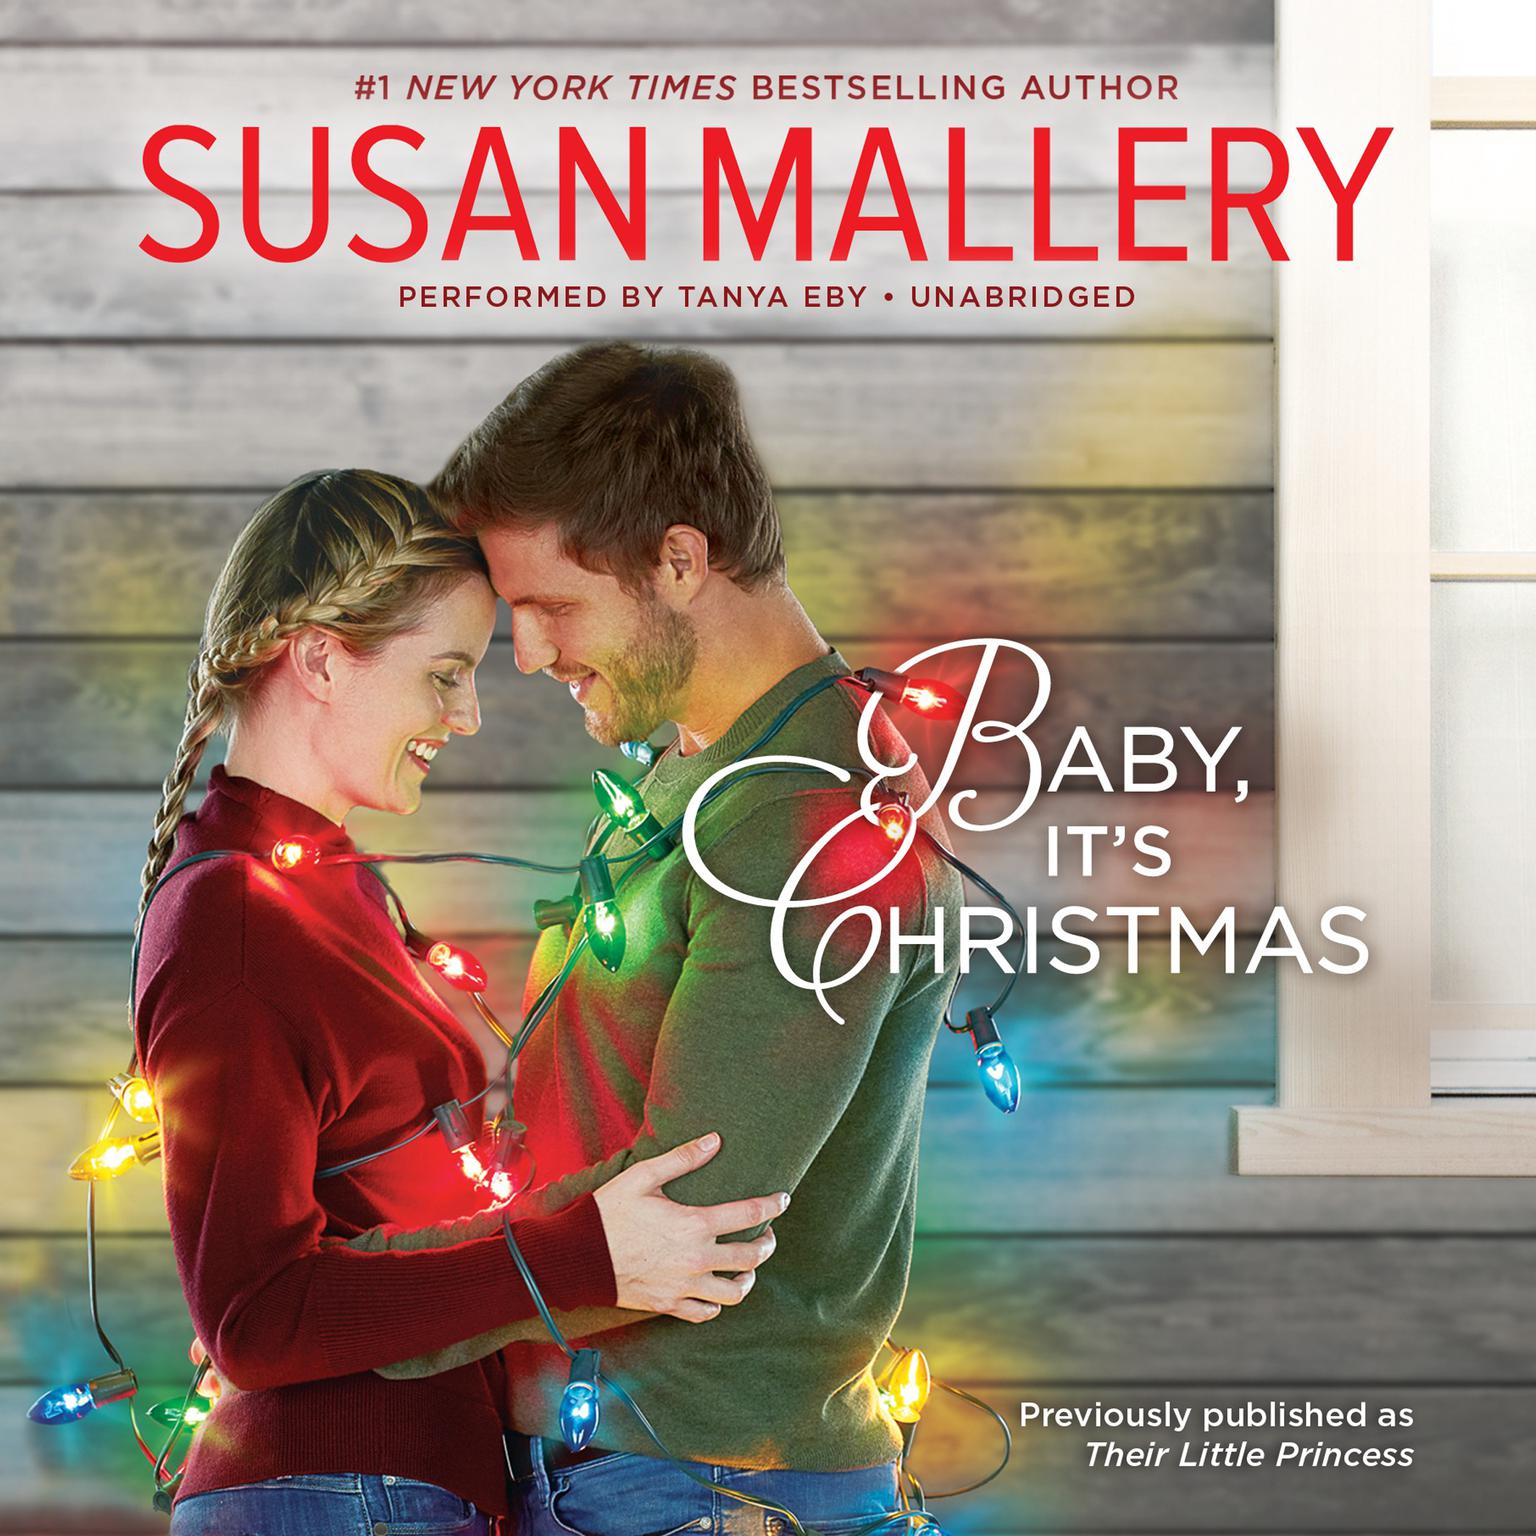 Baby, Its Christmas Audiobook, by Susan Mallery